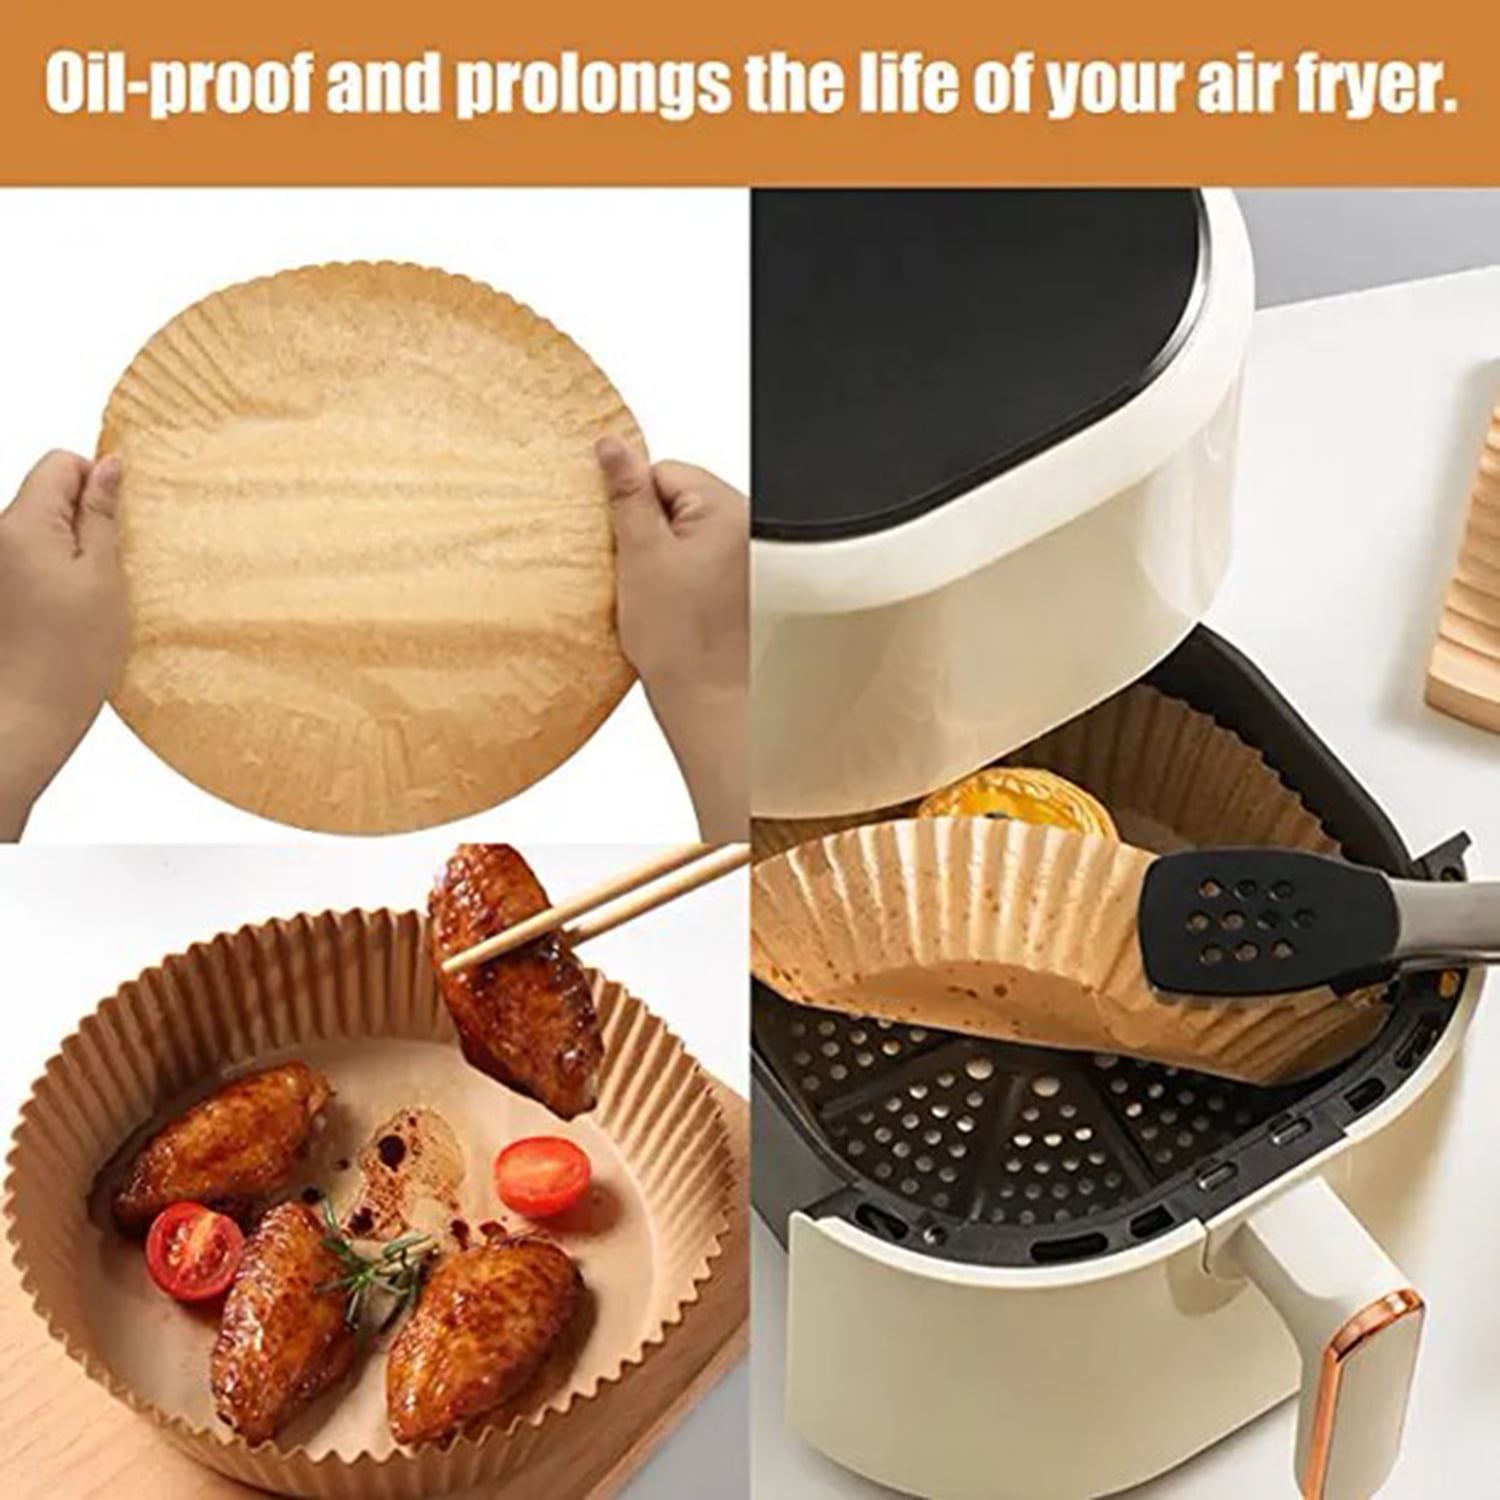 WXHHH FUKQVOD Air Fryer Disposable Paper Liner, 100Pcs-6 inch Liners for Air Fryer, Non-Stick Disposable Air Fryer Liners, Water-proof